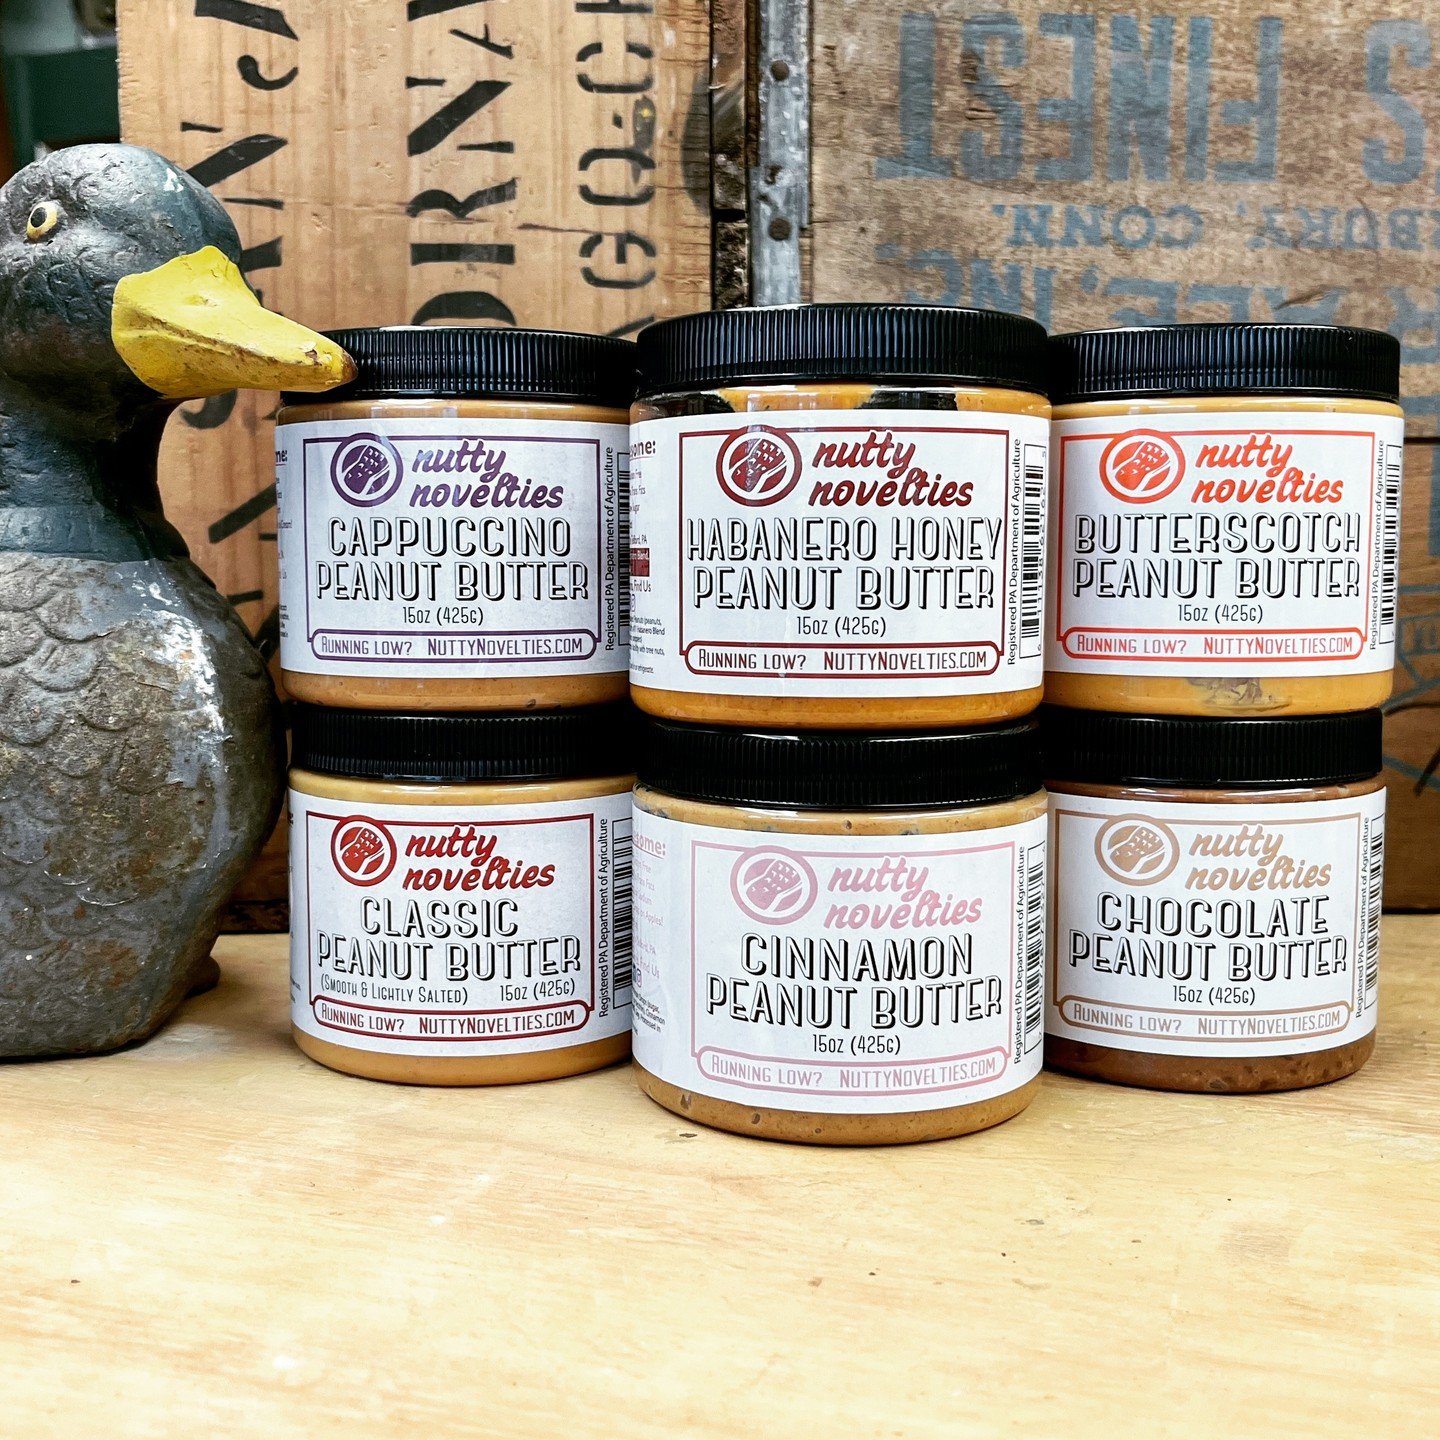 We are restocked on peanut butters courtesy of @nuttynovelties, made right here in Eastern PA. In addition to favorites like Chocolate and Habanero Honey, we&rsquo;re now carrying Cappuccino and Butterscotch! We can&rsquo;t keep these in stock so sto